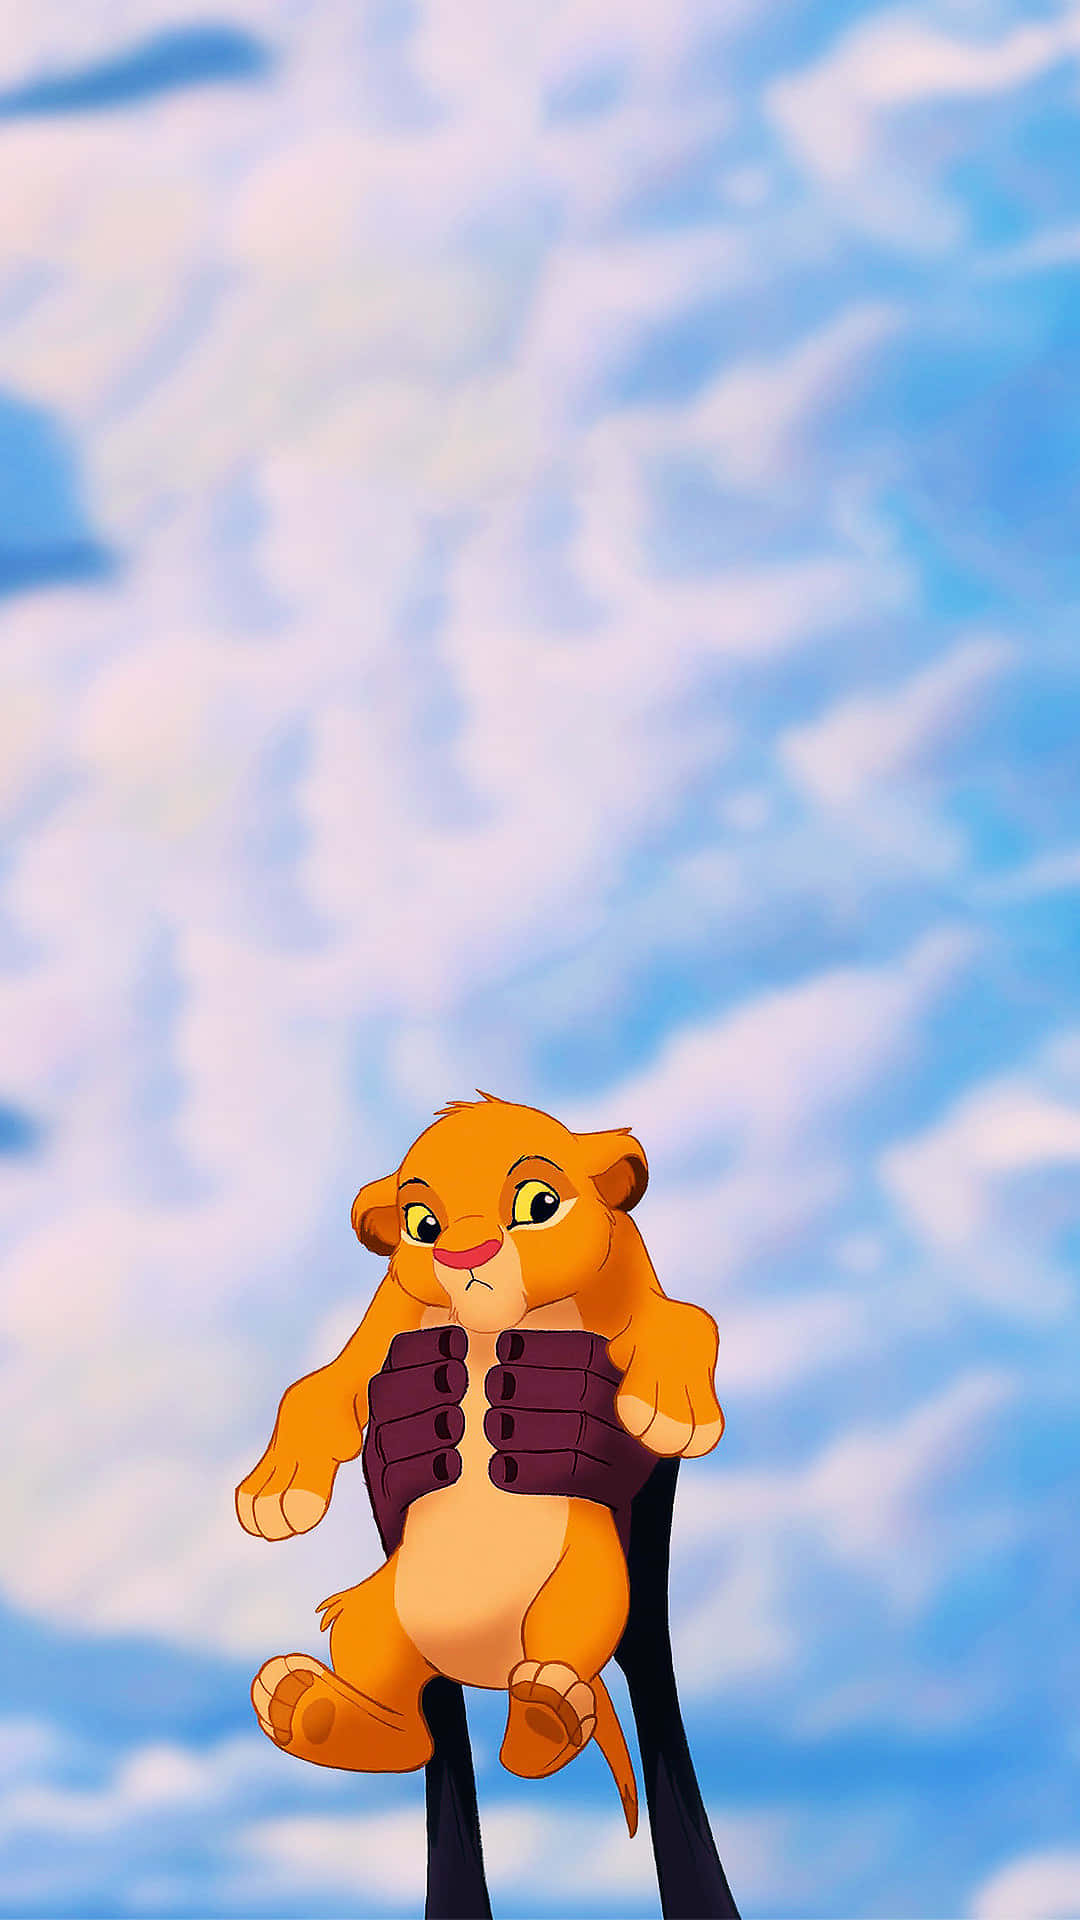 Cute Lion King Iconic Scene Poster Wallpaper